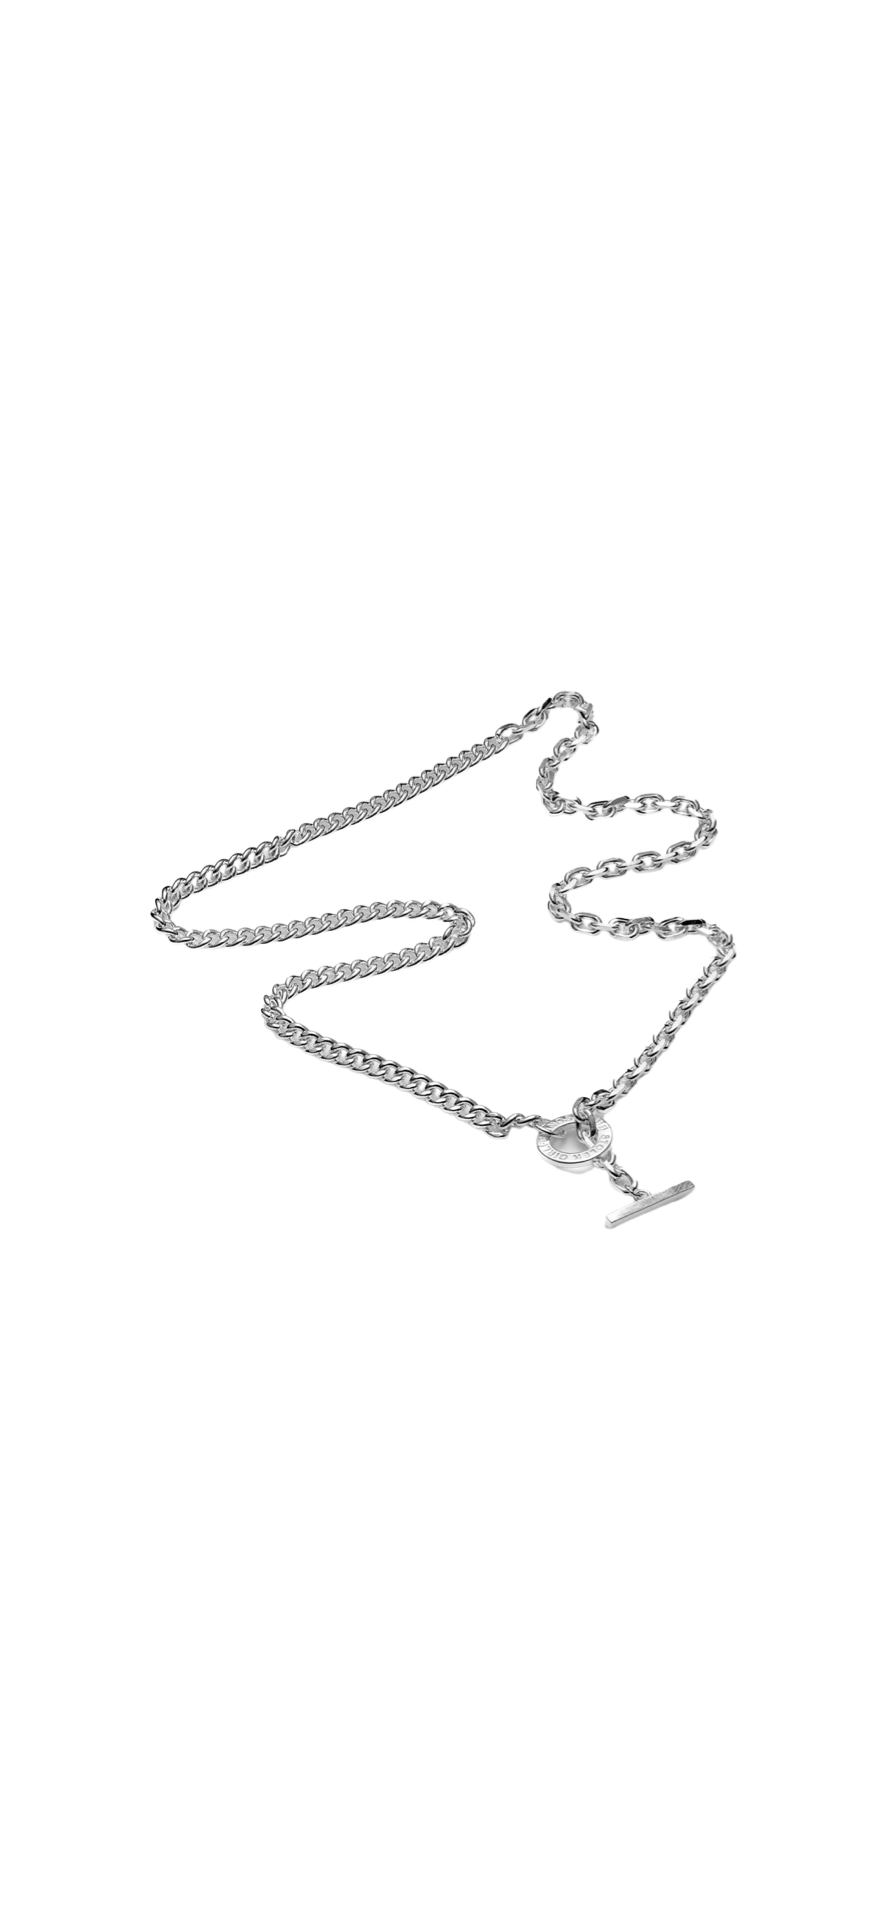 T-Bar Halo Necklace By Stolen Girlfriends Club - Sterling Silver